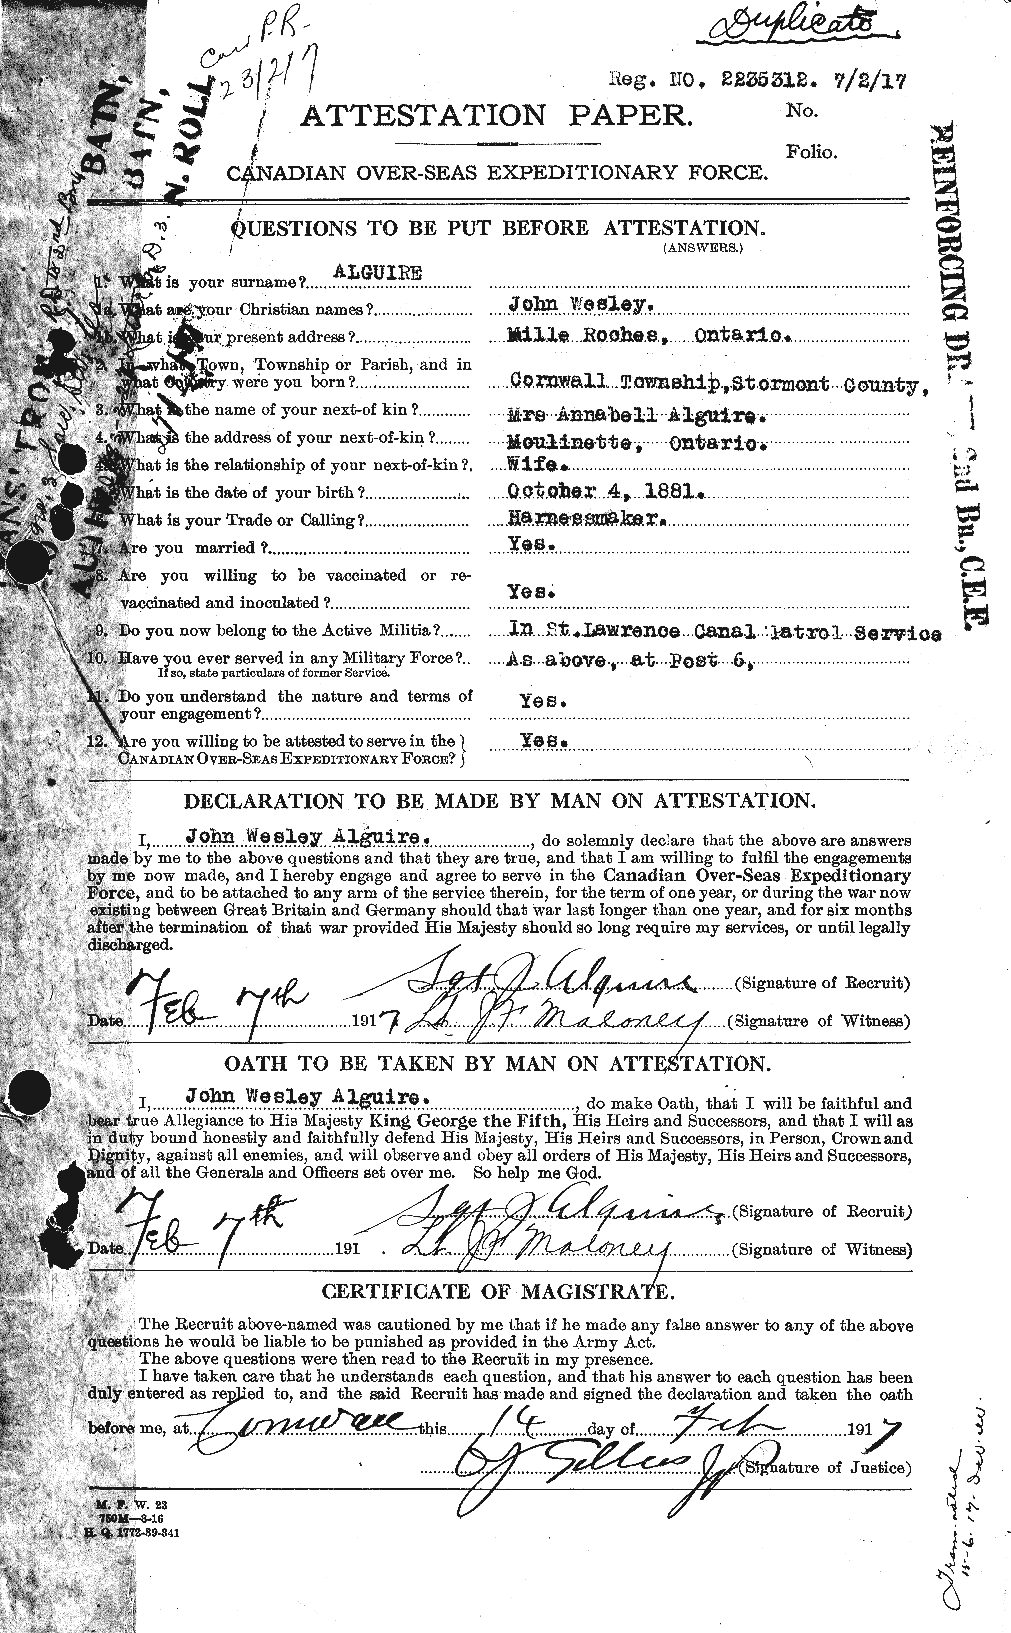 Personnel Records of the First World War - CEF 205082a